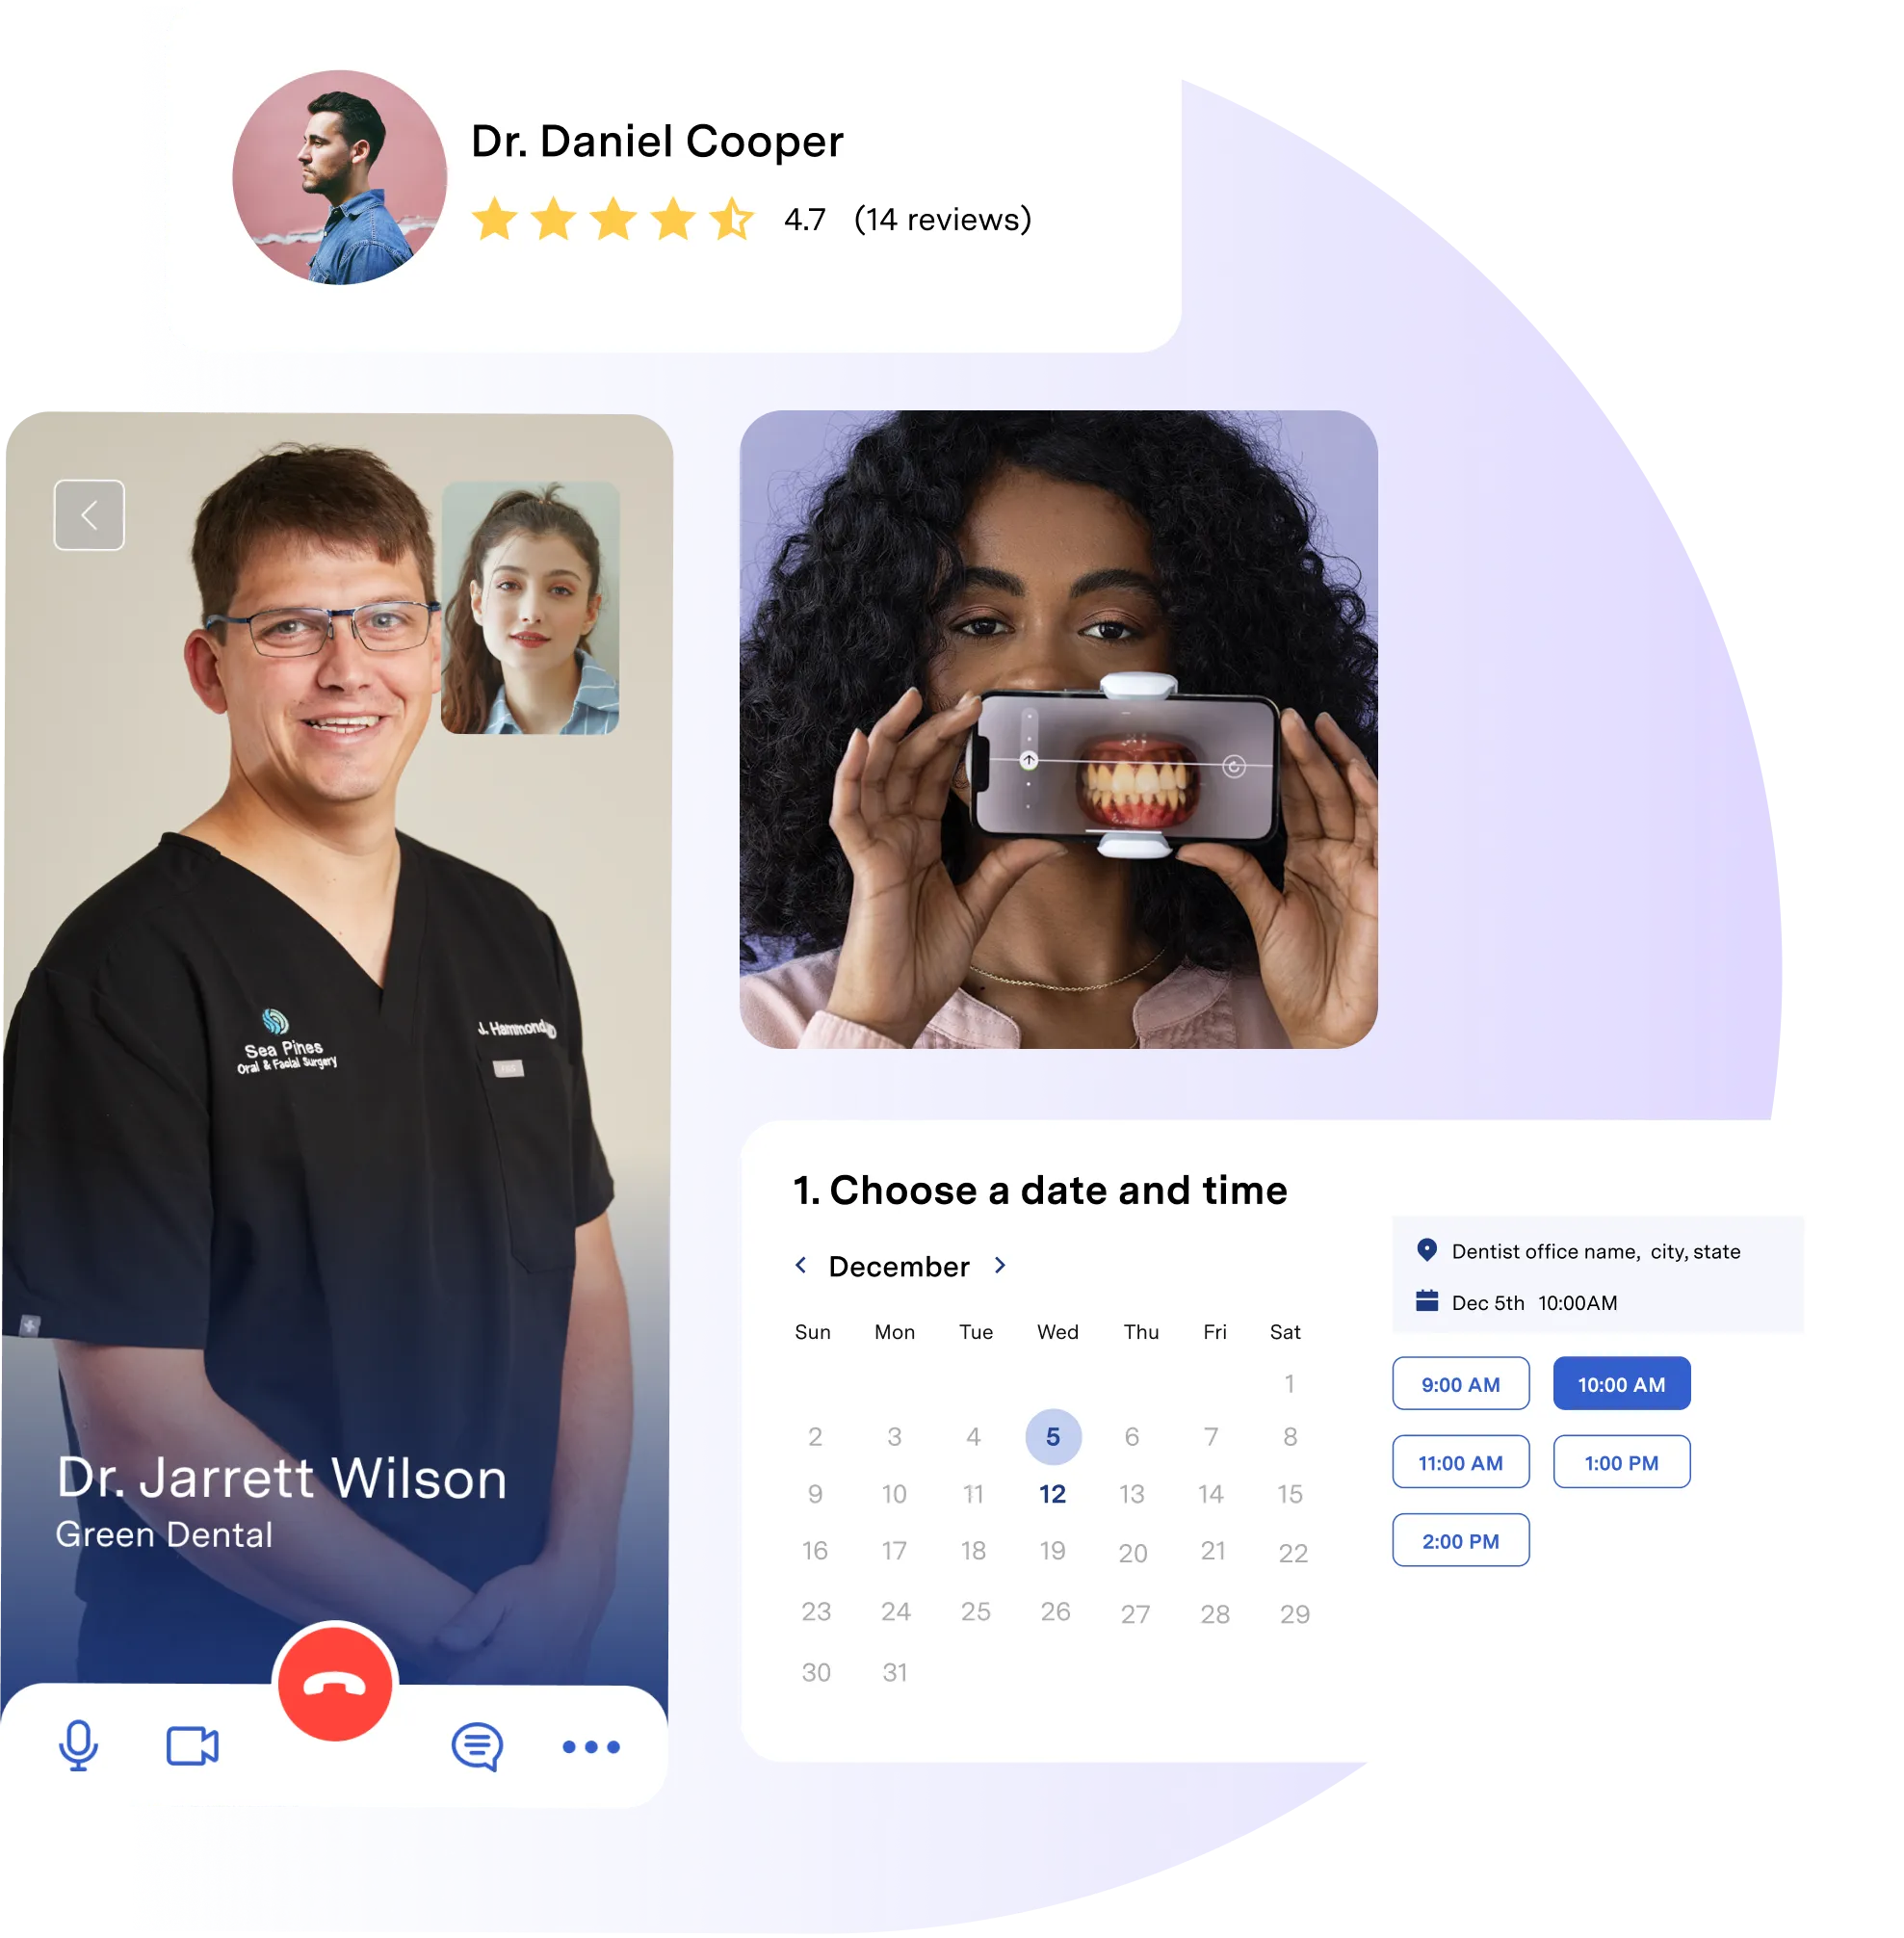 Elements taken from Two Front's patient work flows. From top to bottom, graphics include: a 5-star review of a doctor, a video call between a dentist and a patient, a different patient showing off her teeth, and a day/time appointment modal.